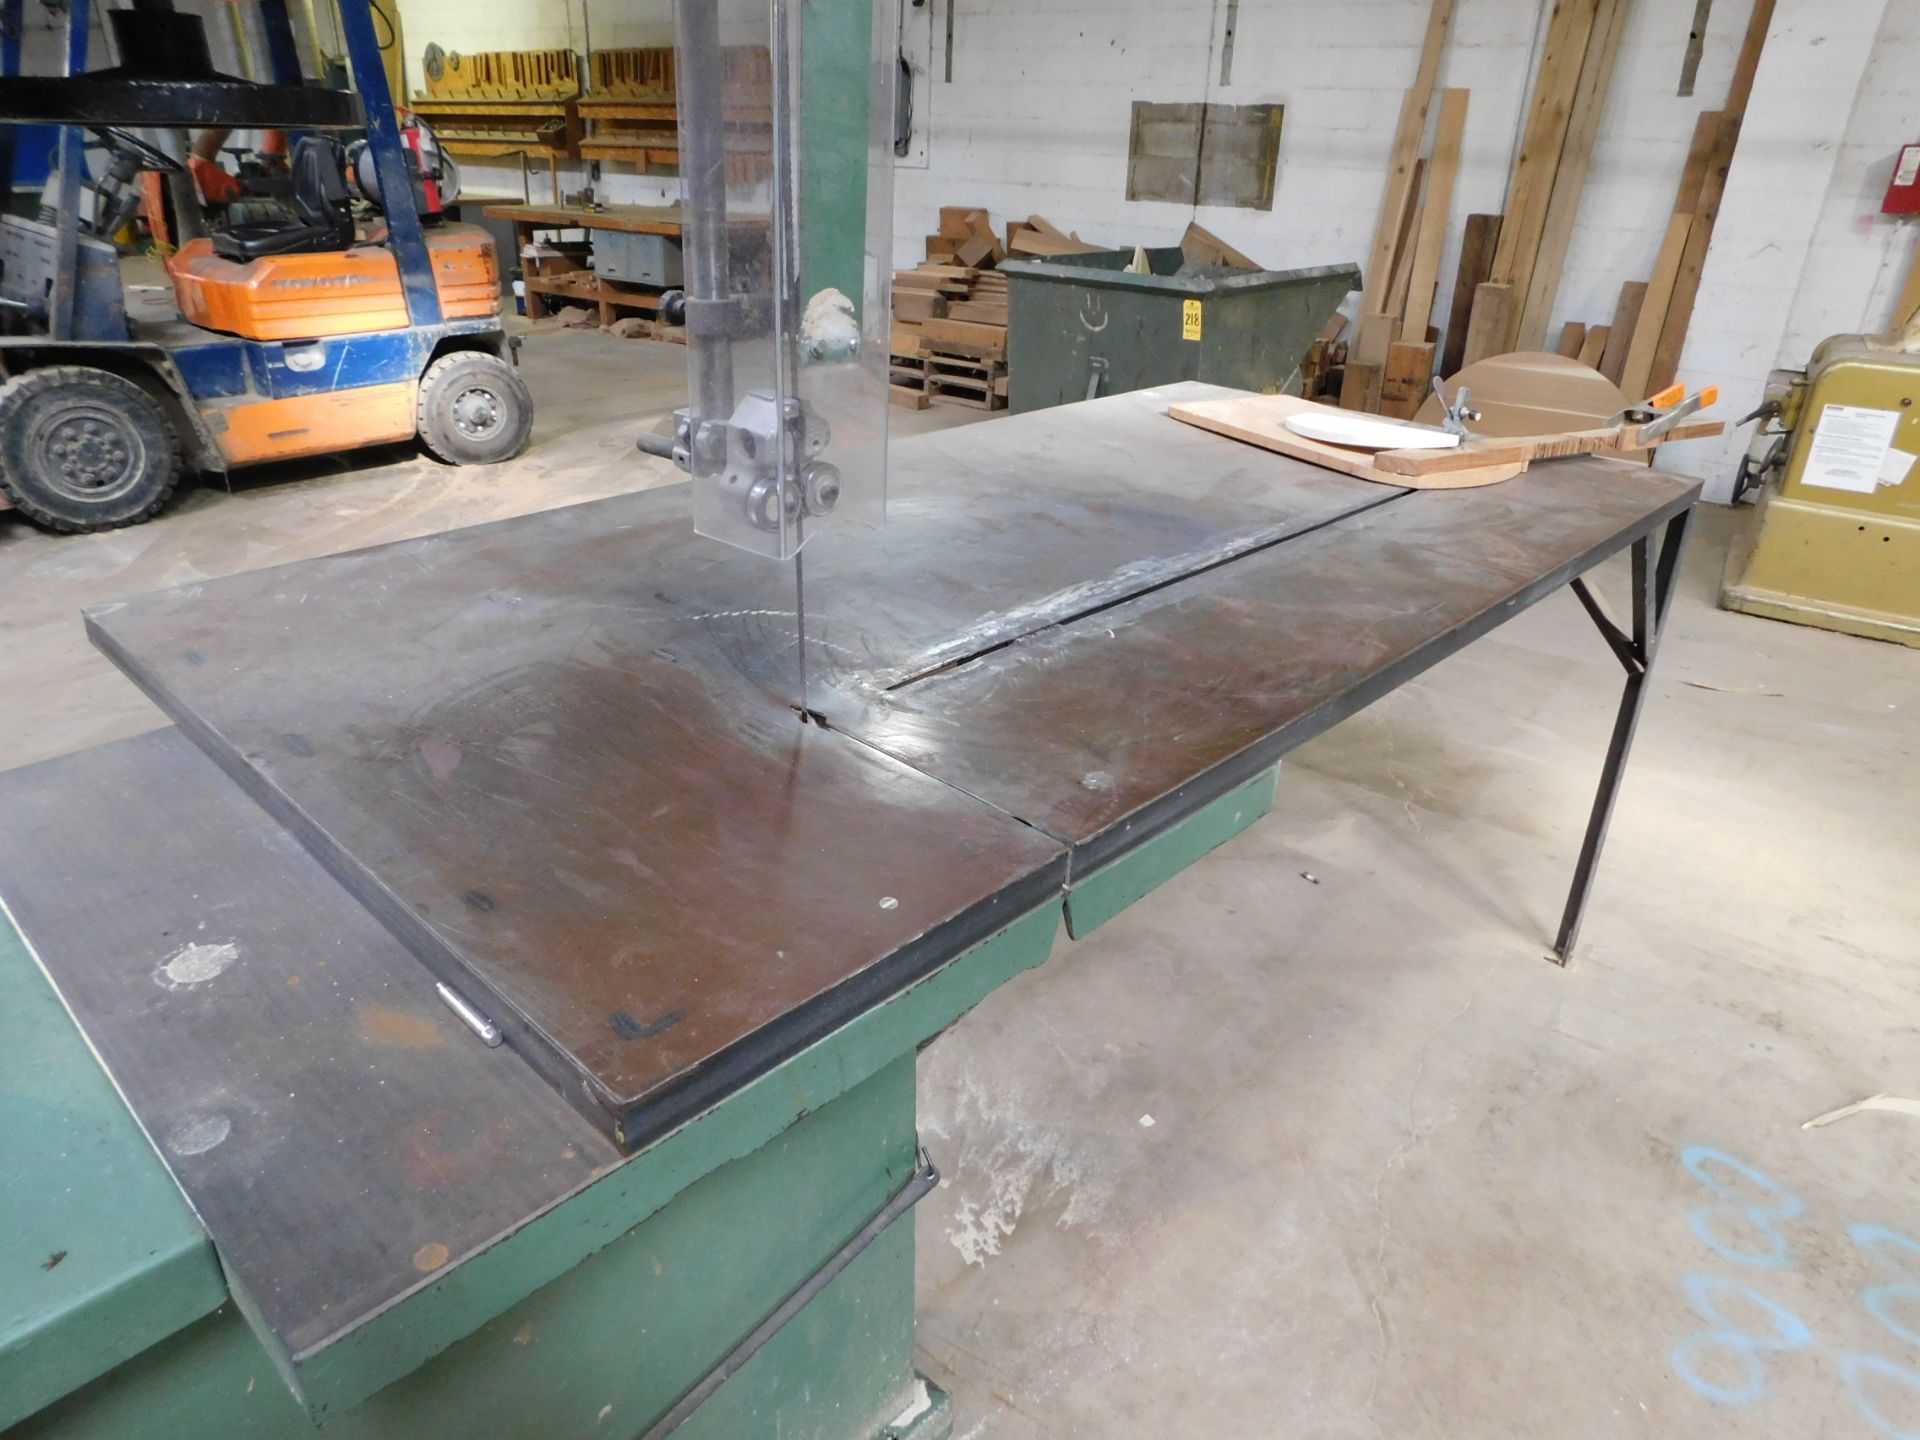 Meber Model 800, 32" Vertical Band Saw, s/n 3165, Infinite Radius Table from 2" - 72" - Image 5 of 7